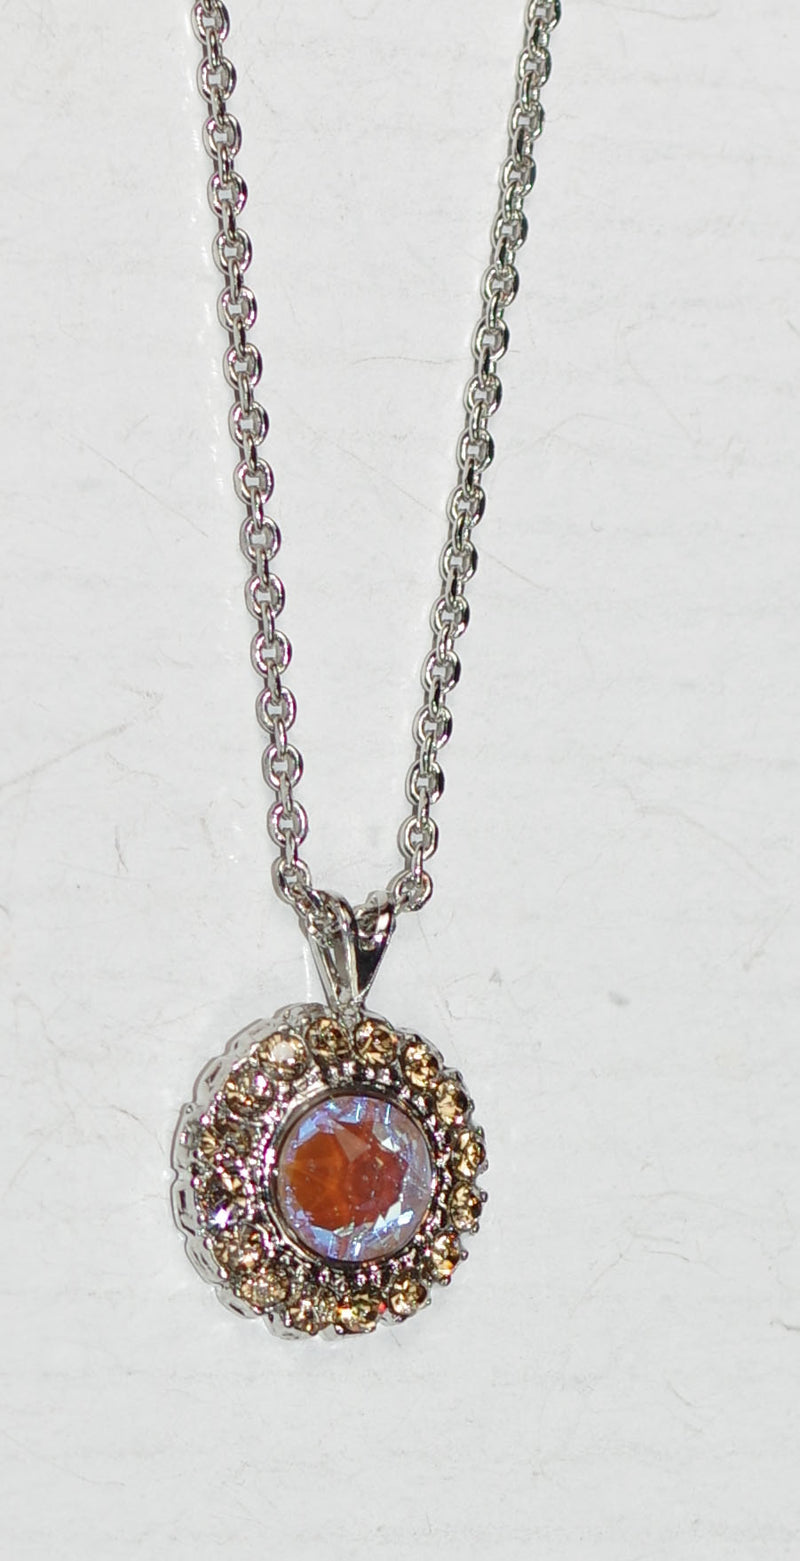 MARIANA PENDANT BUTTER PECAN: pink, amber stones in silver rhodium setting, 1/2" pendant, 20" adjustable chain